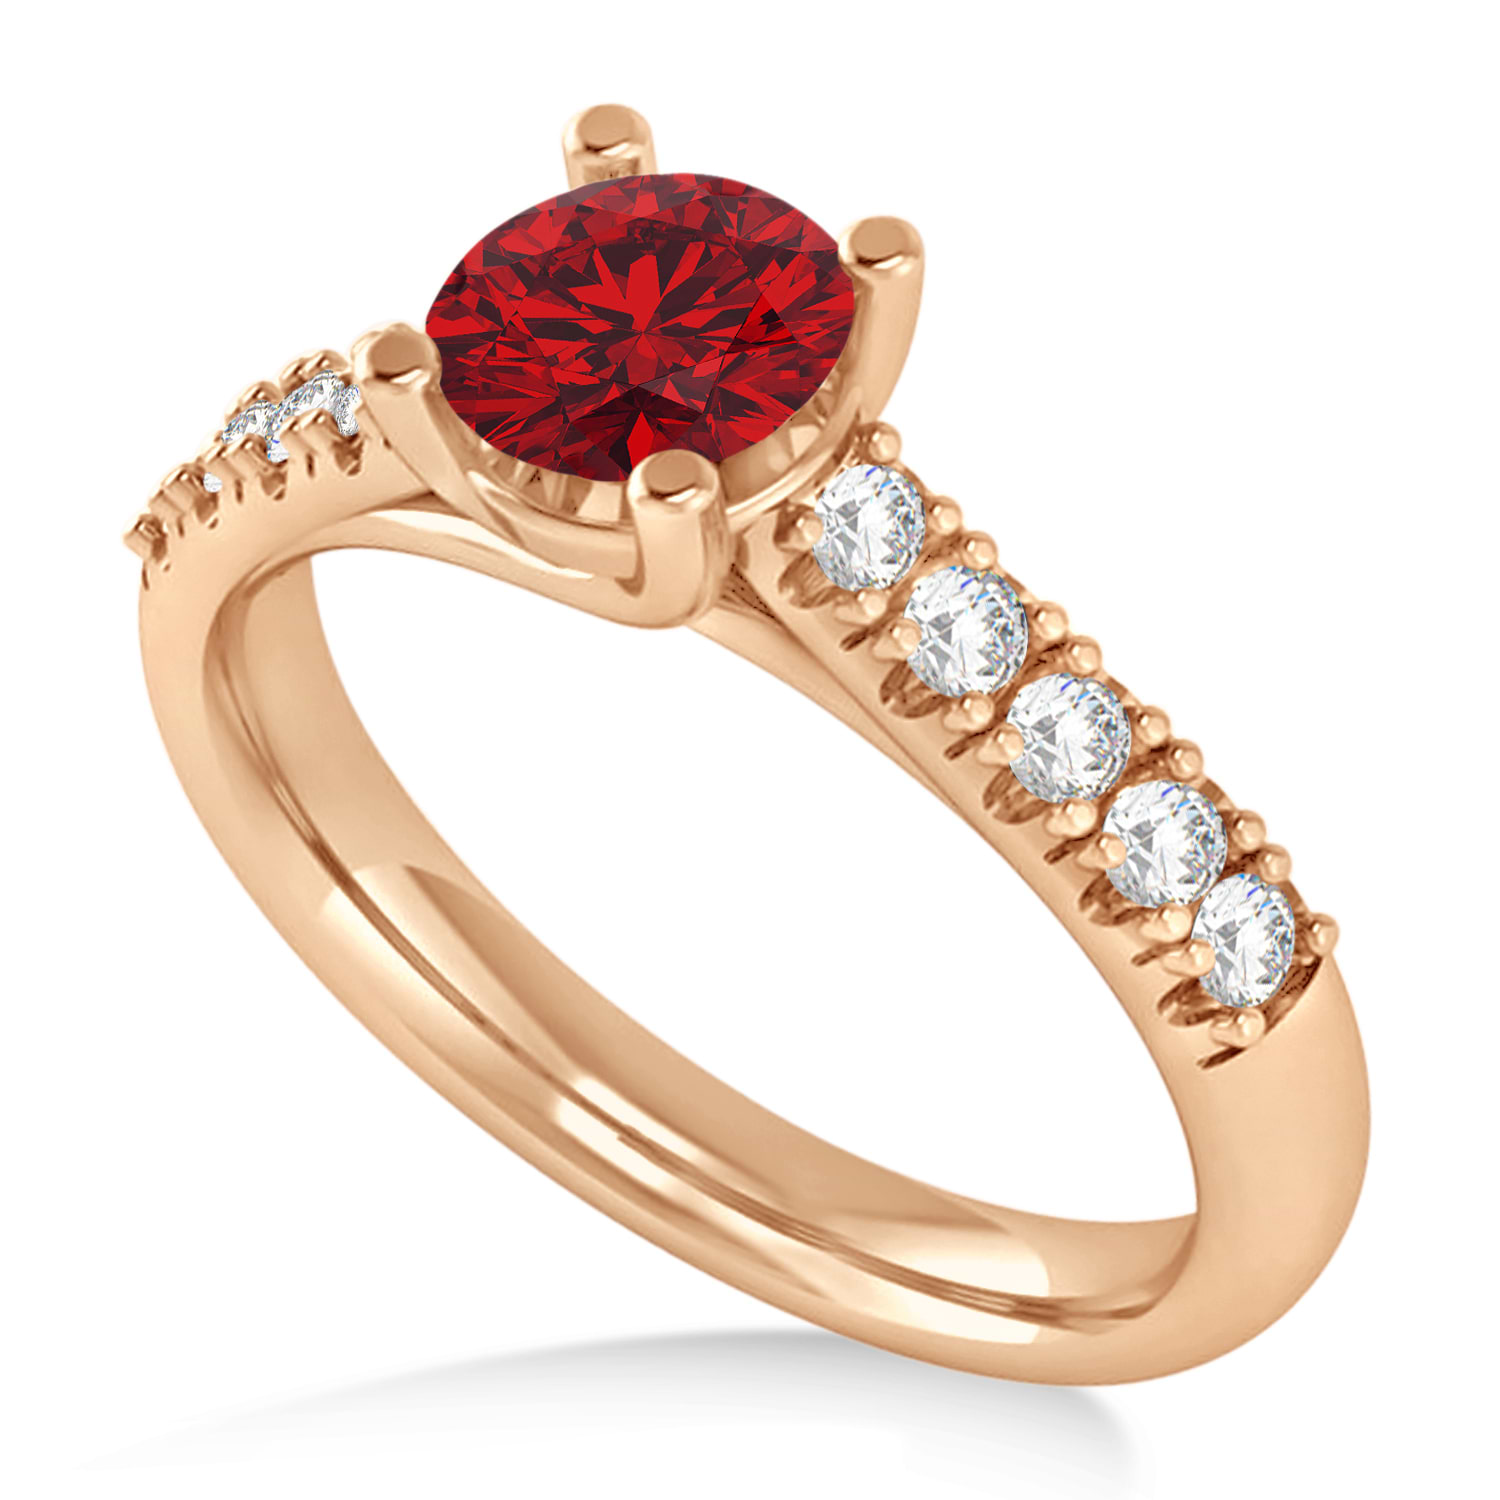 Ruby & Diamond Accented Pre-Set Engagement Ring 14k Rose Gold (1.05ct)